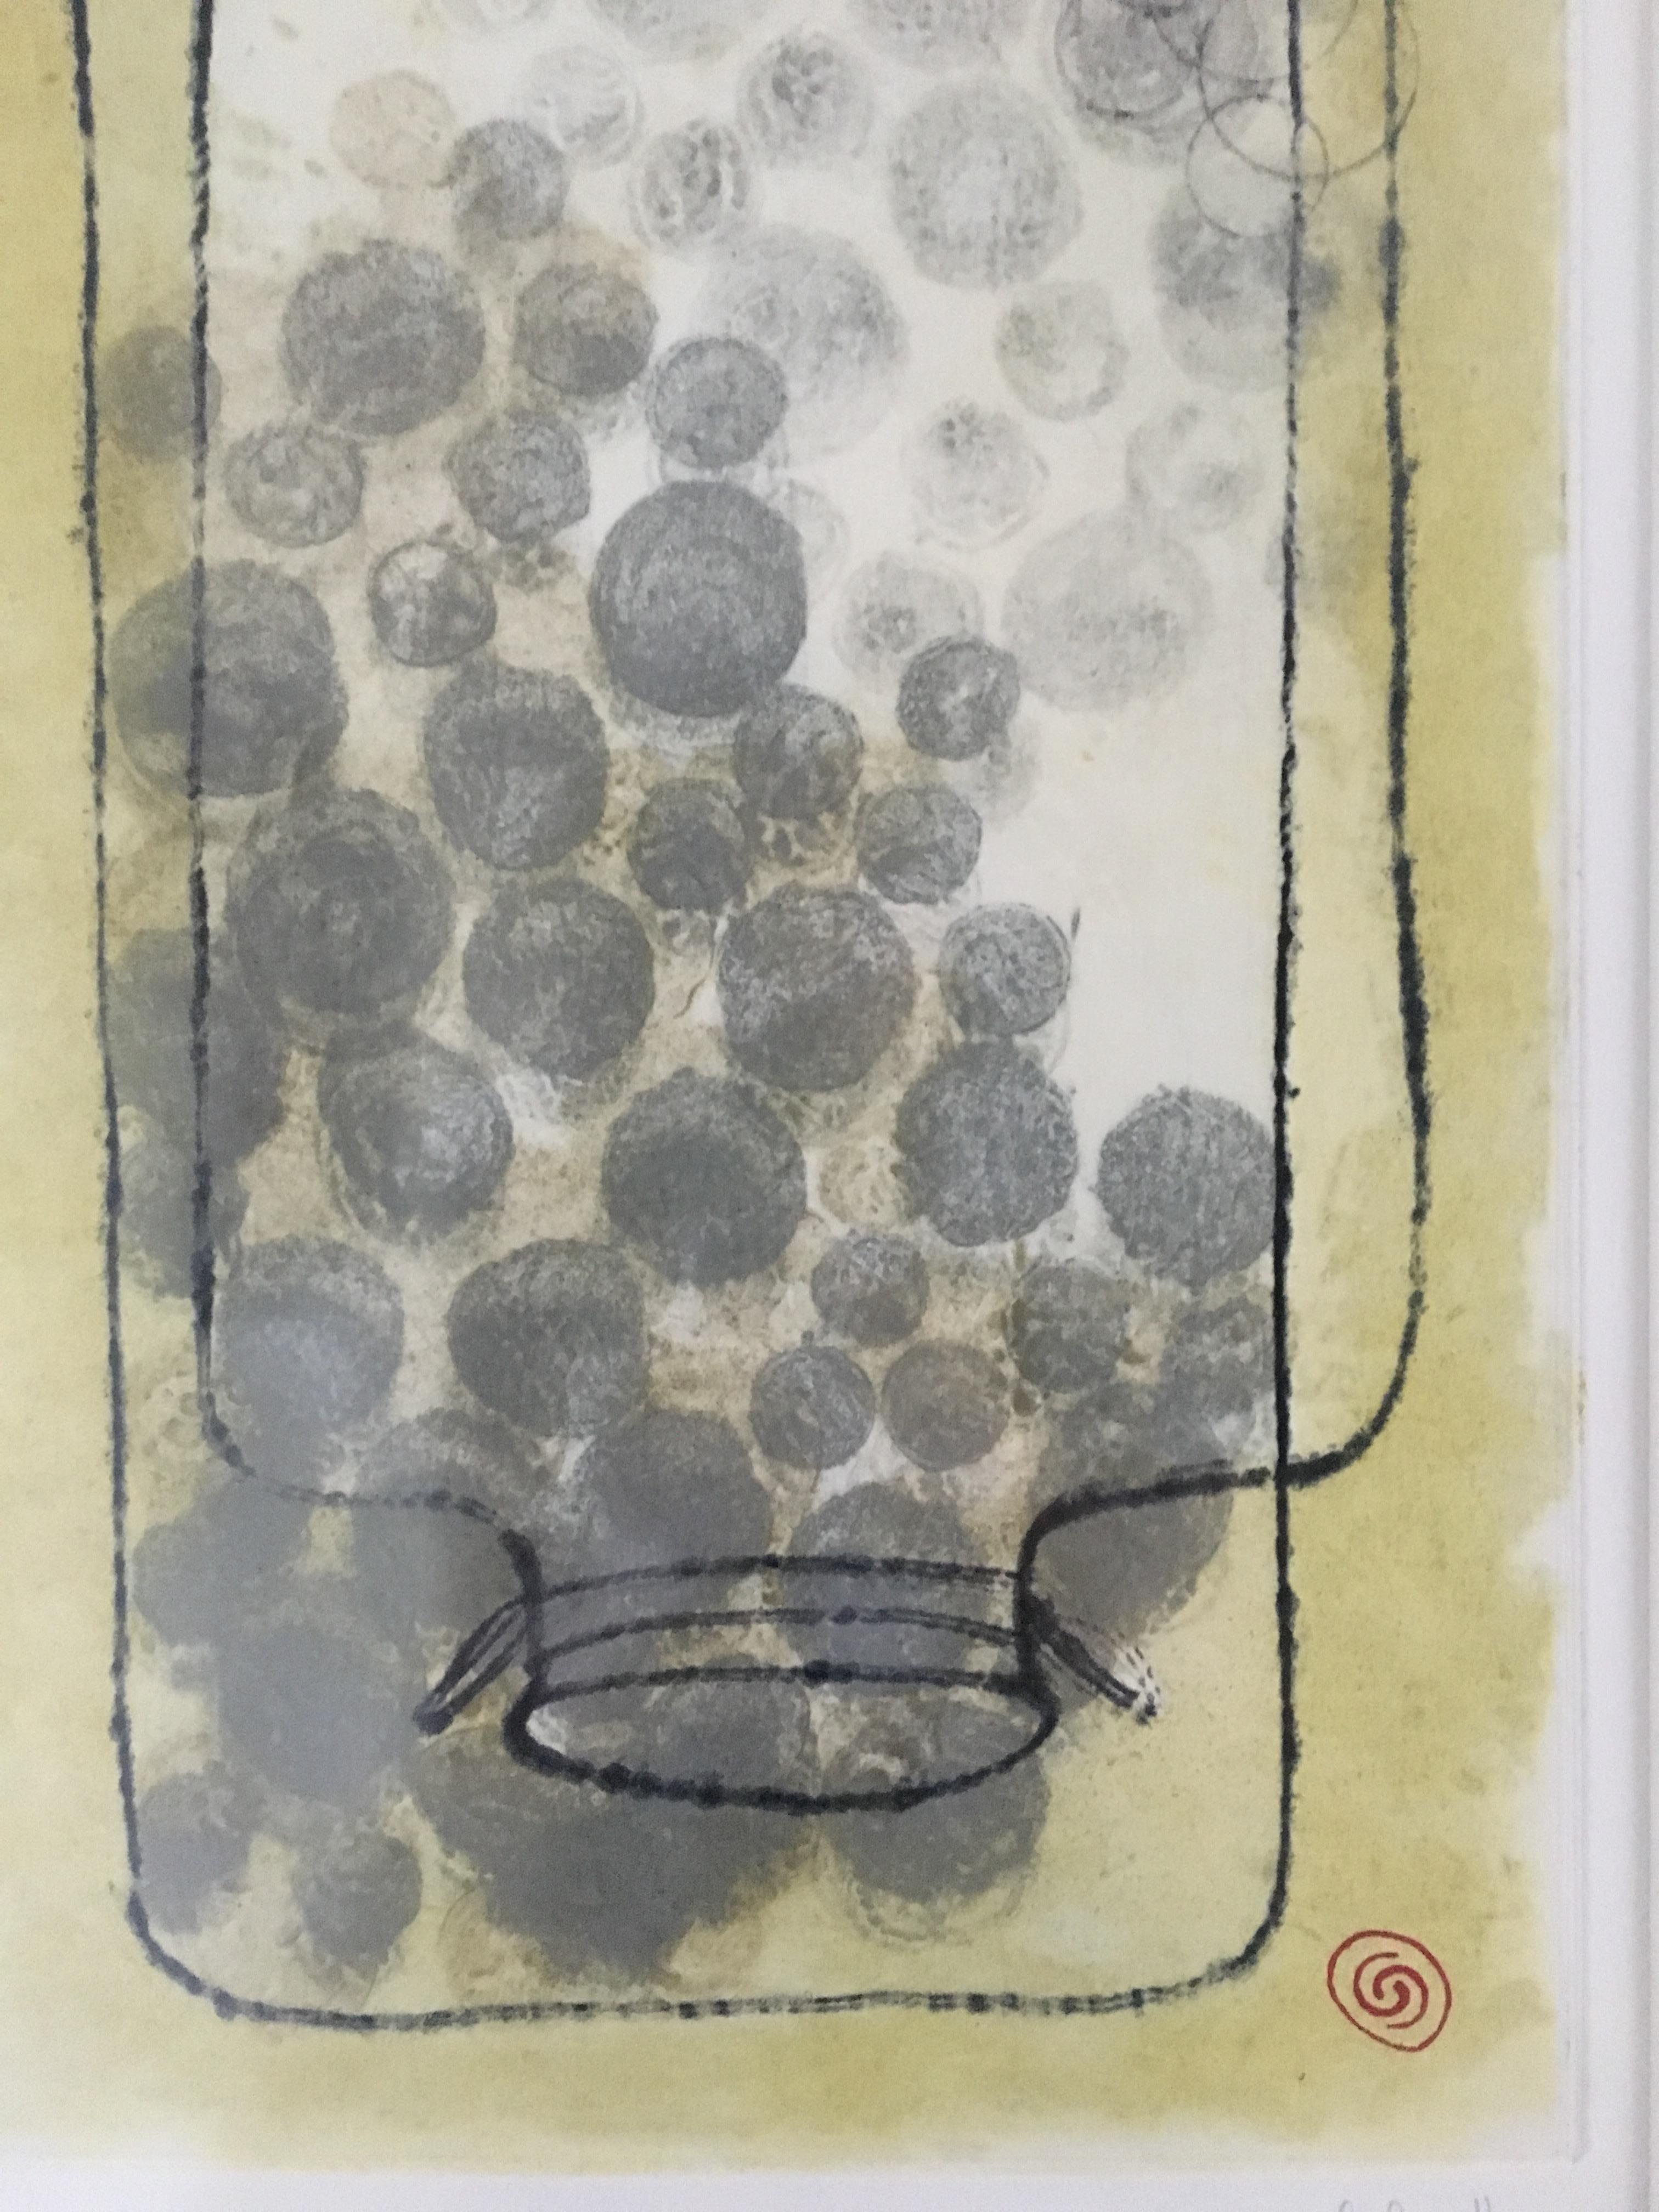 This artwork is a framed Carborundum Collagraph by artist Christiane Corcelle. The size (35 x 28 in.) includes the frame.

Printmaking and installation are Corcelle’s primary forms of artistic expression. Corcelle’s prints are based on a perpetual